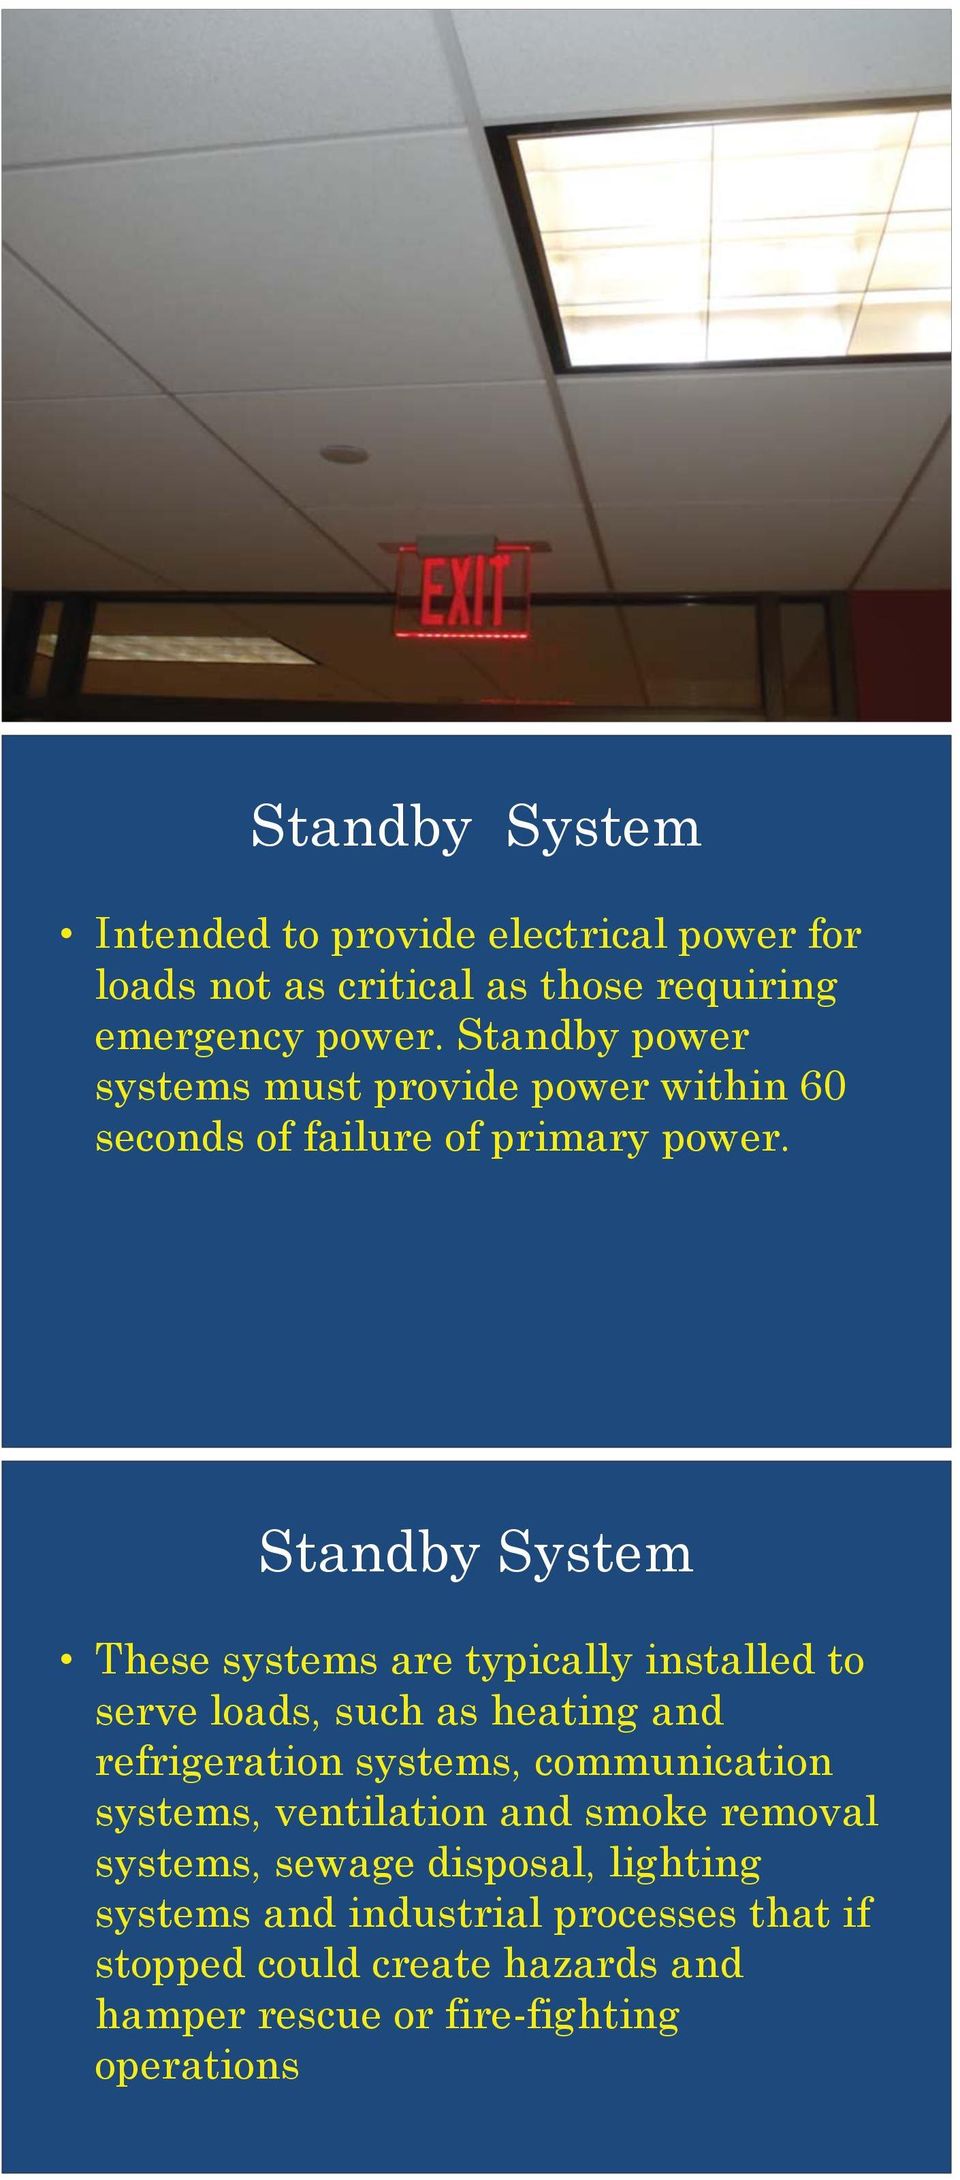 Standby System These systems are typically installed to serve loads, such as heating and refrigeration systems, communication